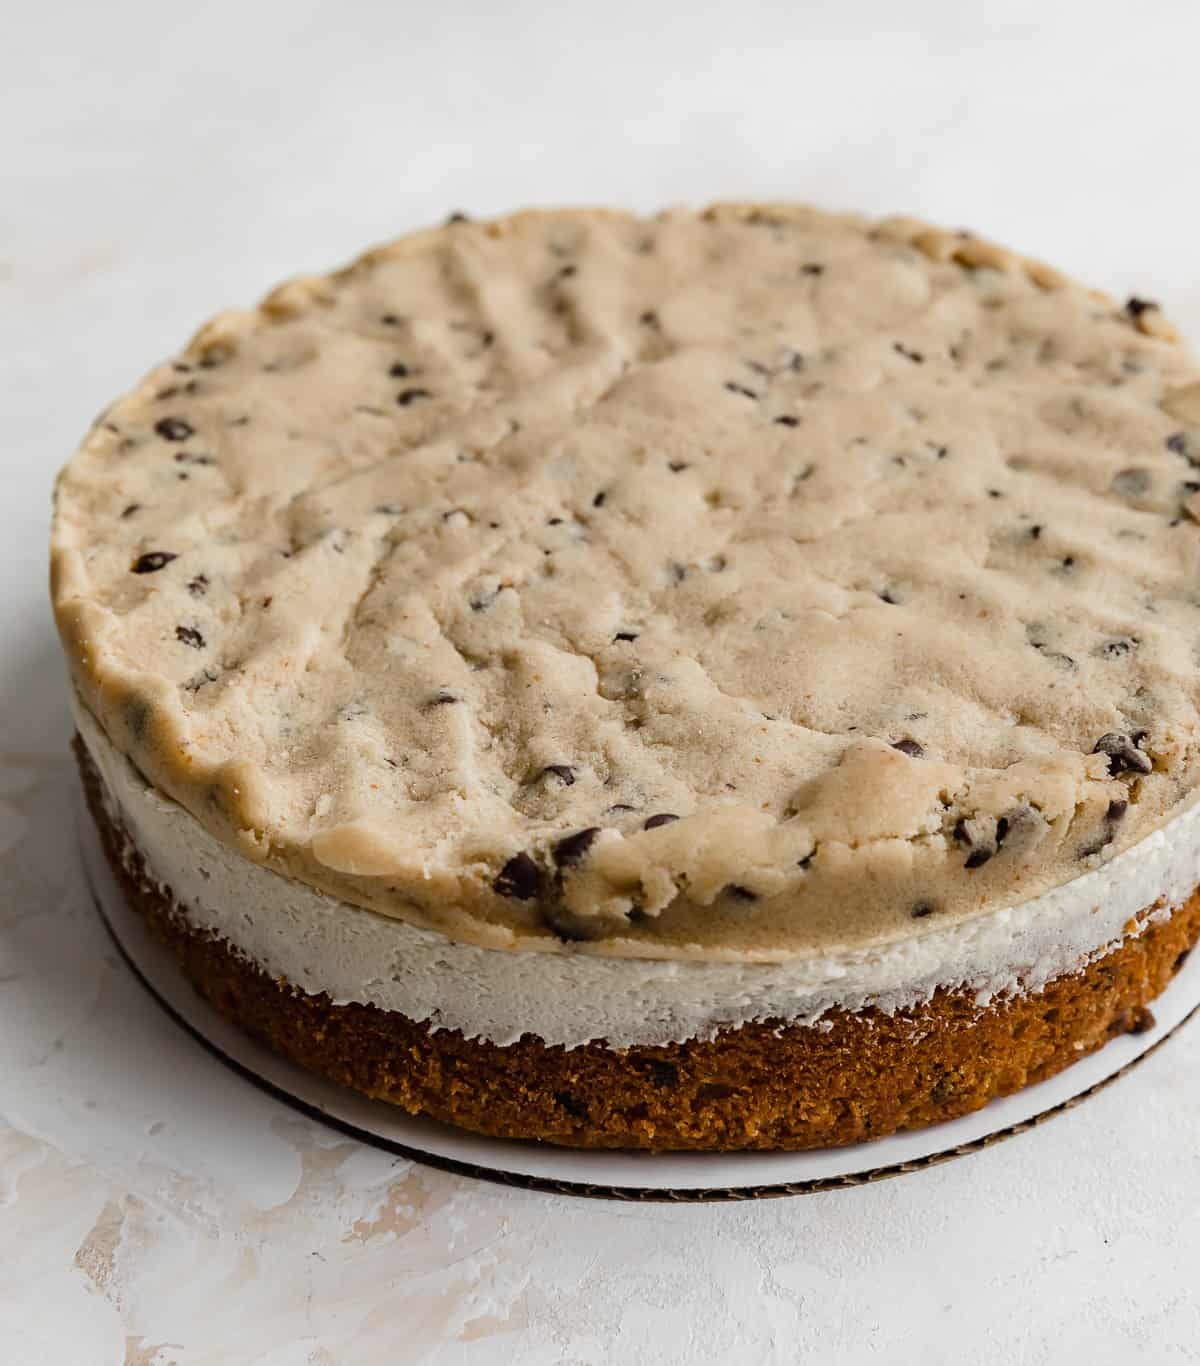 Edible cookie dough layer on top of a frosting coated cake layer.